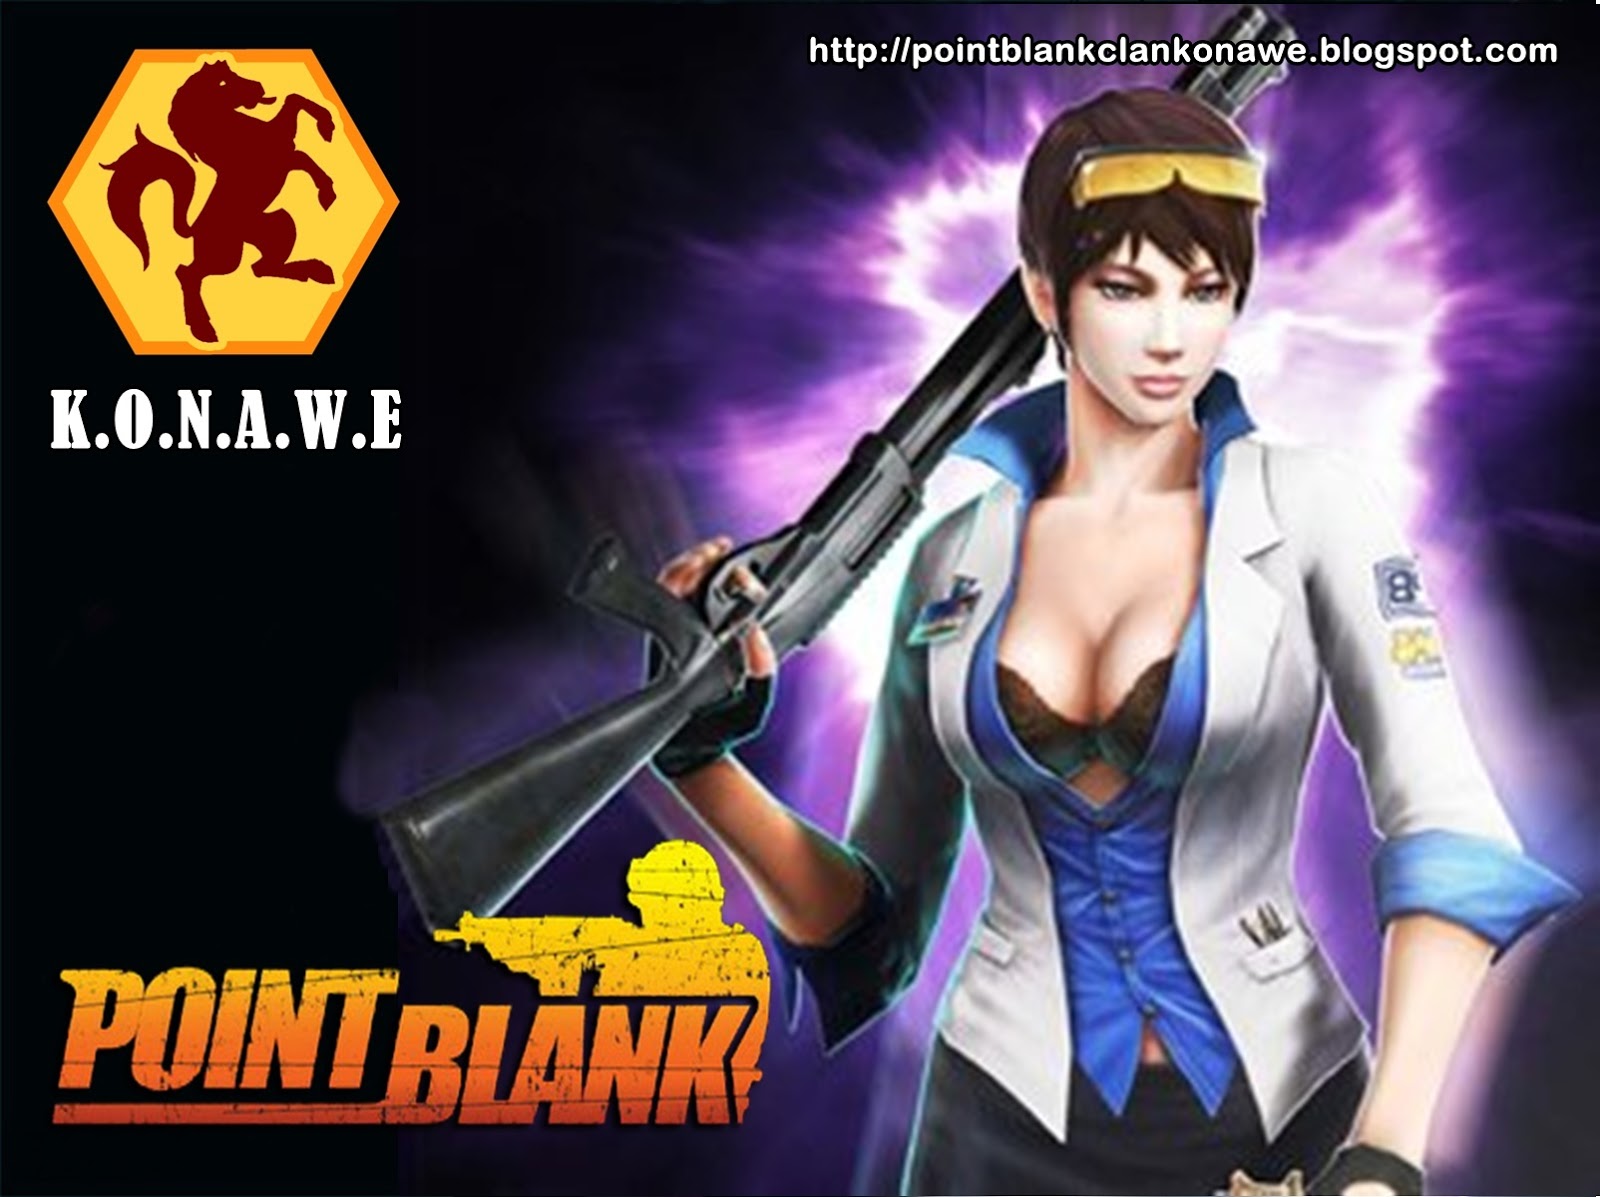 POINT BLANK Clan K.O.N.A.W.E: POINT BLANK Wallpapers 2012